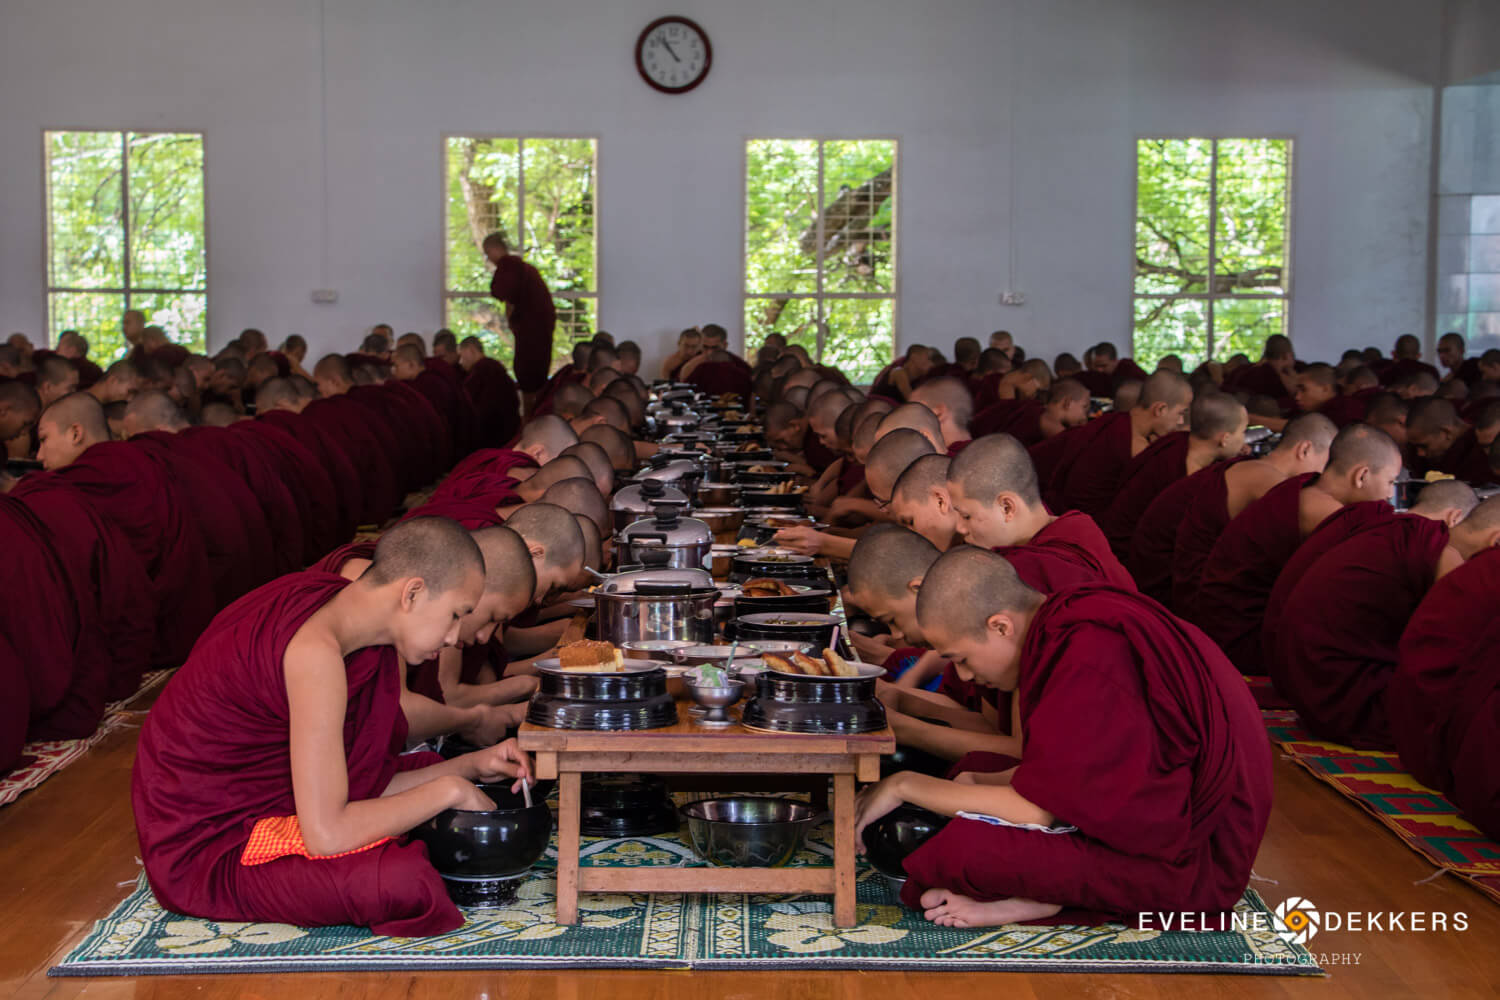 Last meal of the day for the monks - Myanmar